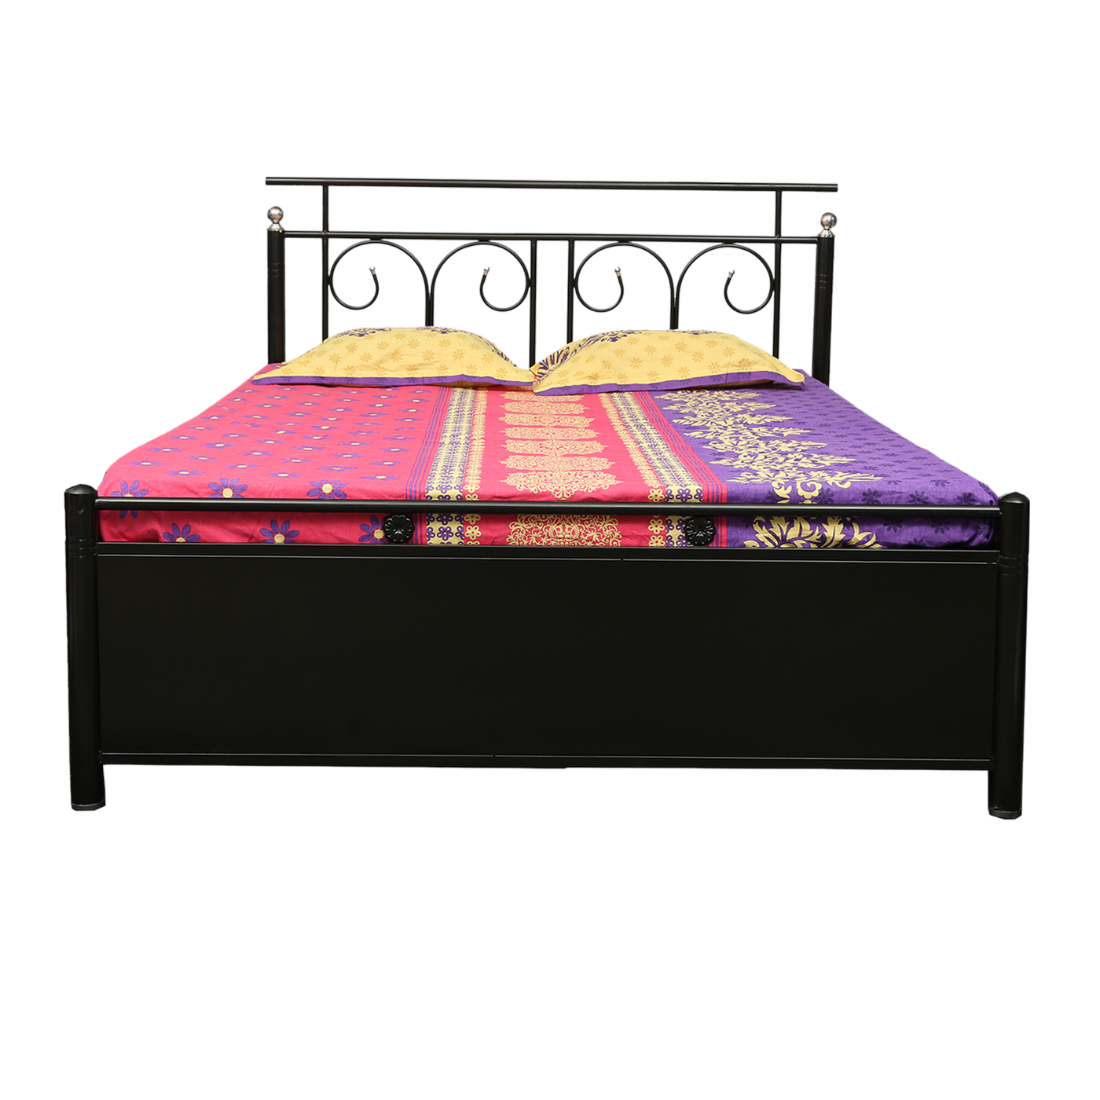 Colin Hydraulic Storage King Metal Bed (Color - Black) with Designer Headrest